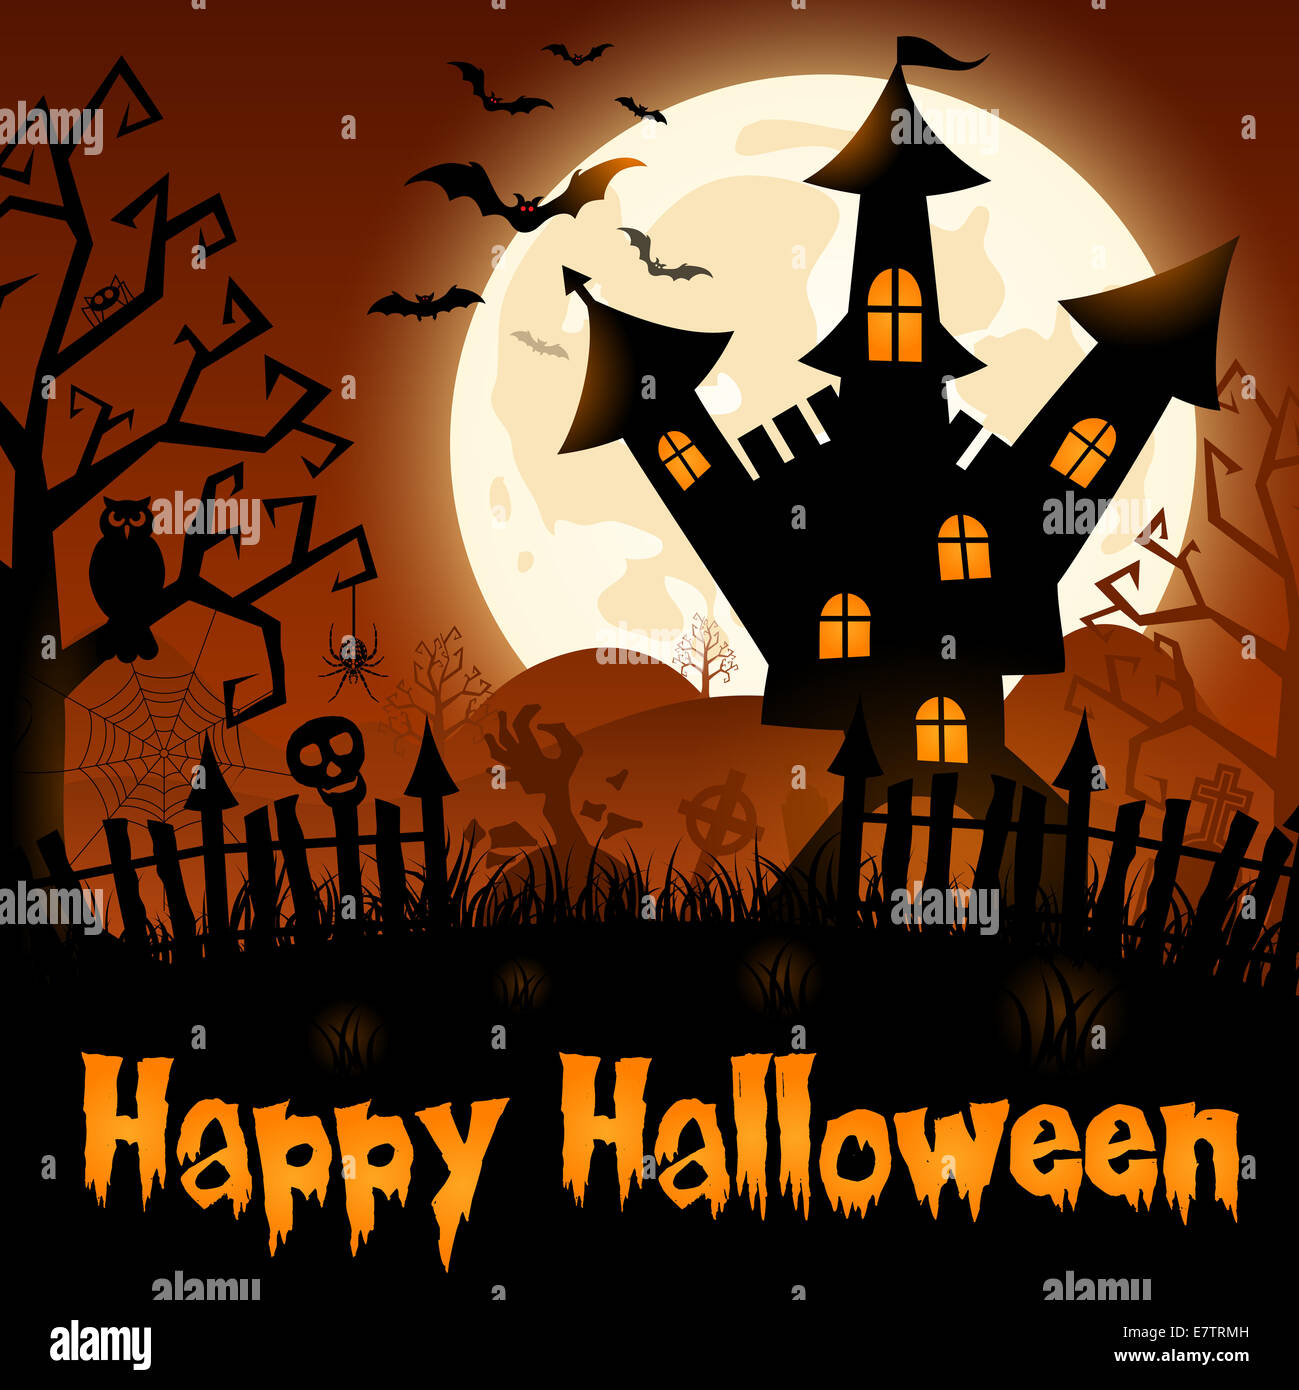 Halloween Poster with Castle on Full Moon Background, illustration Stock Photo